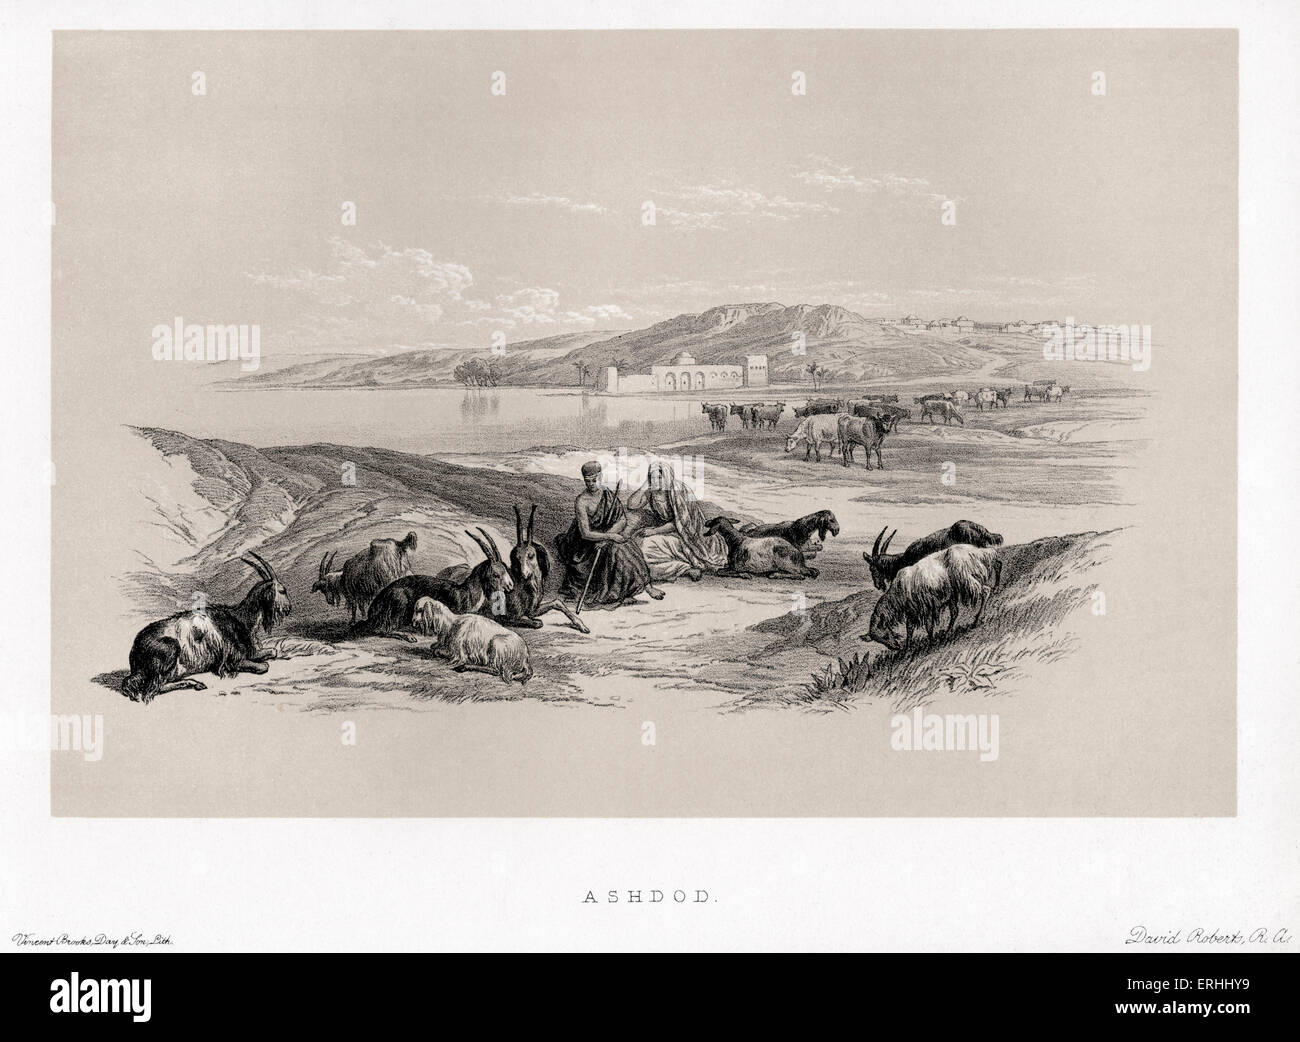 Ashdod.  By David Roberts. Lithographs of the Holy Land. Stock Photo